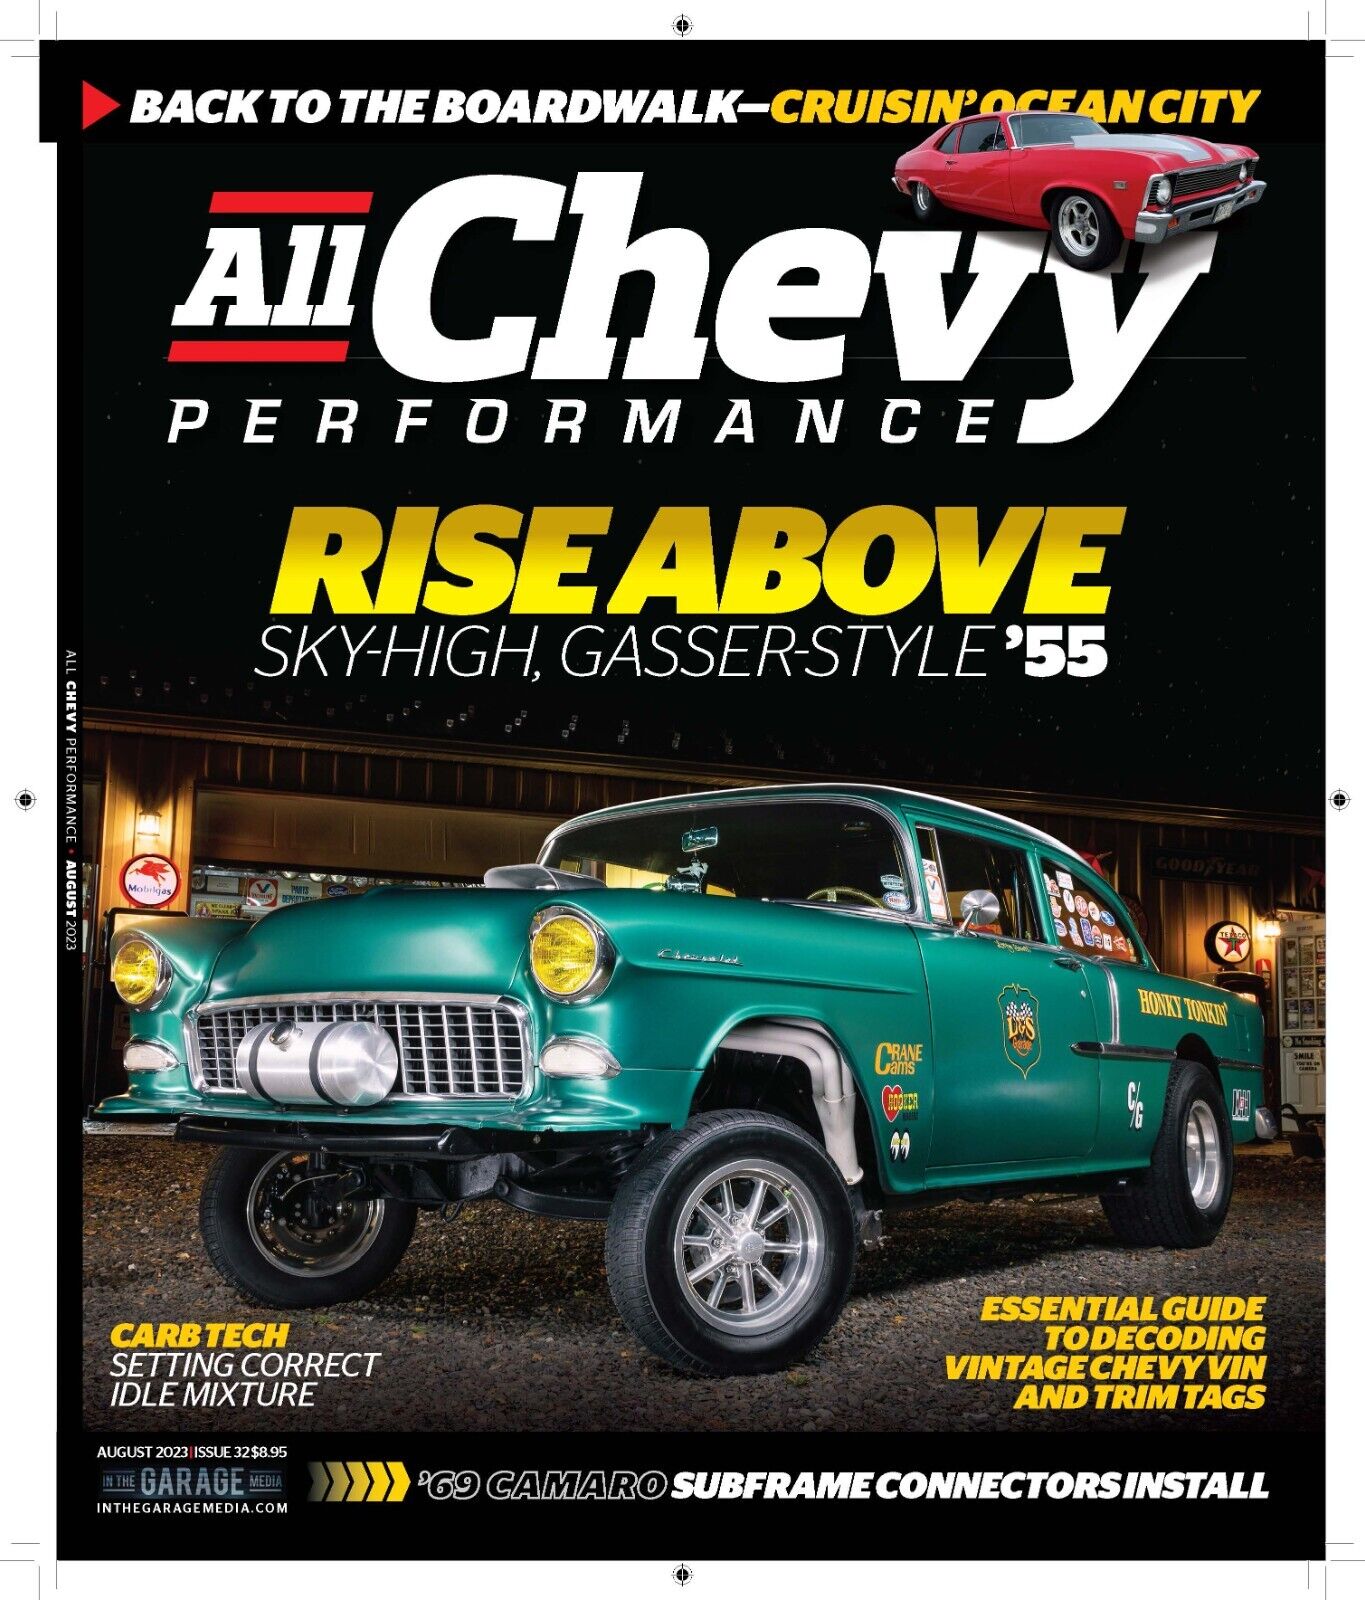 All Chevy Performance Magazine Issue #32 August 2023 - New